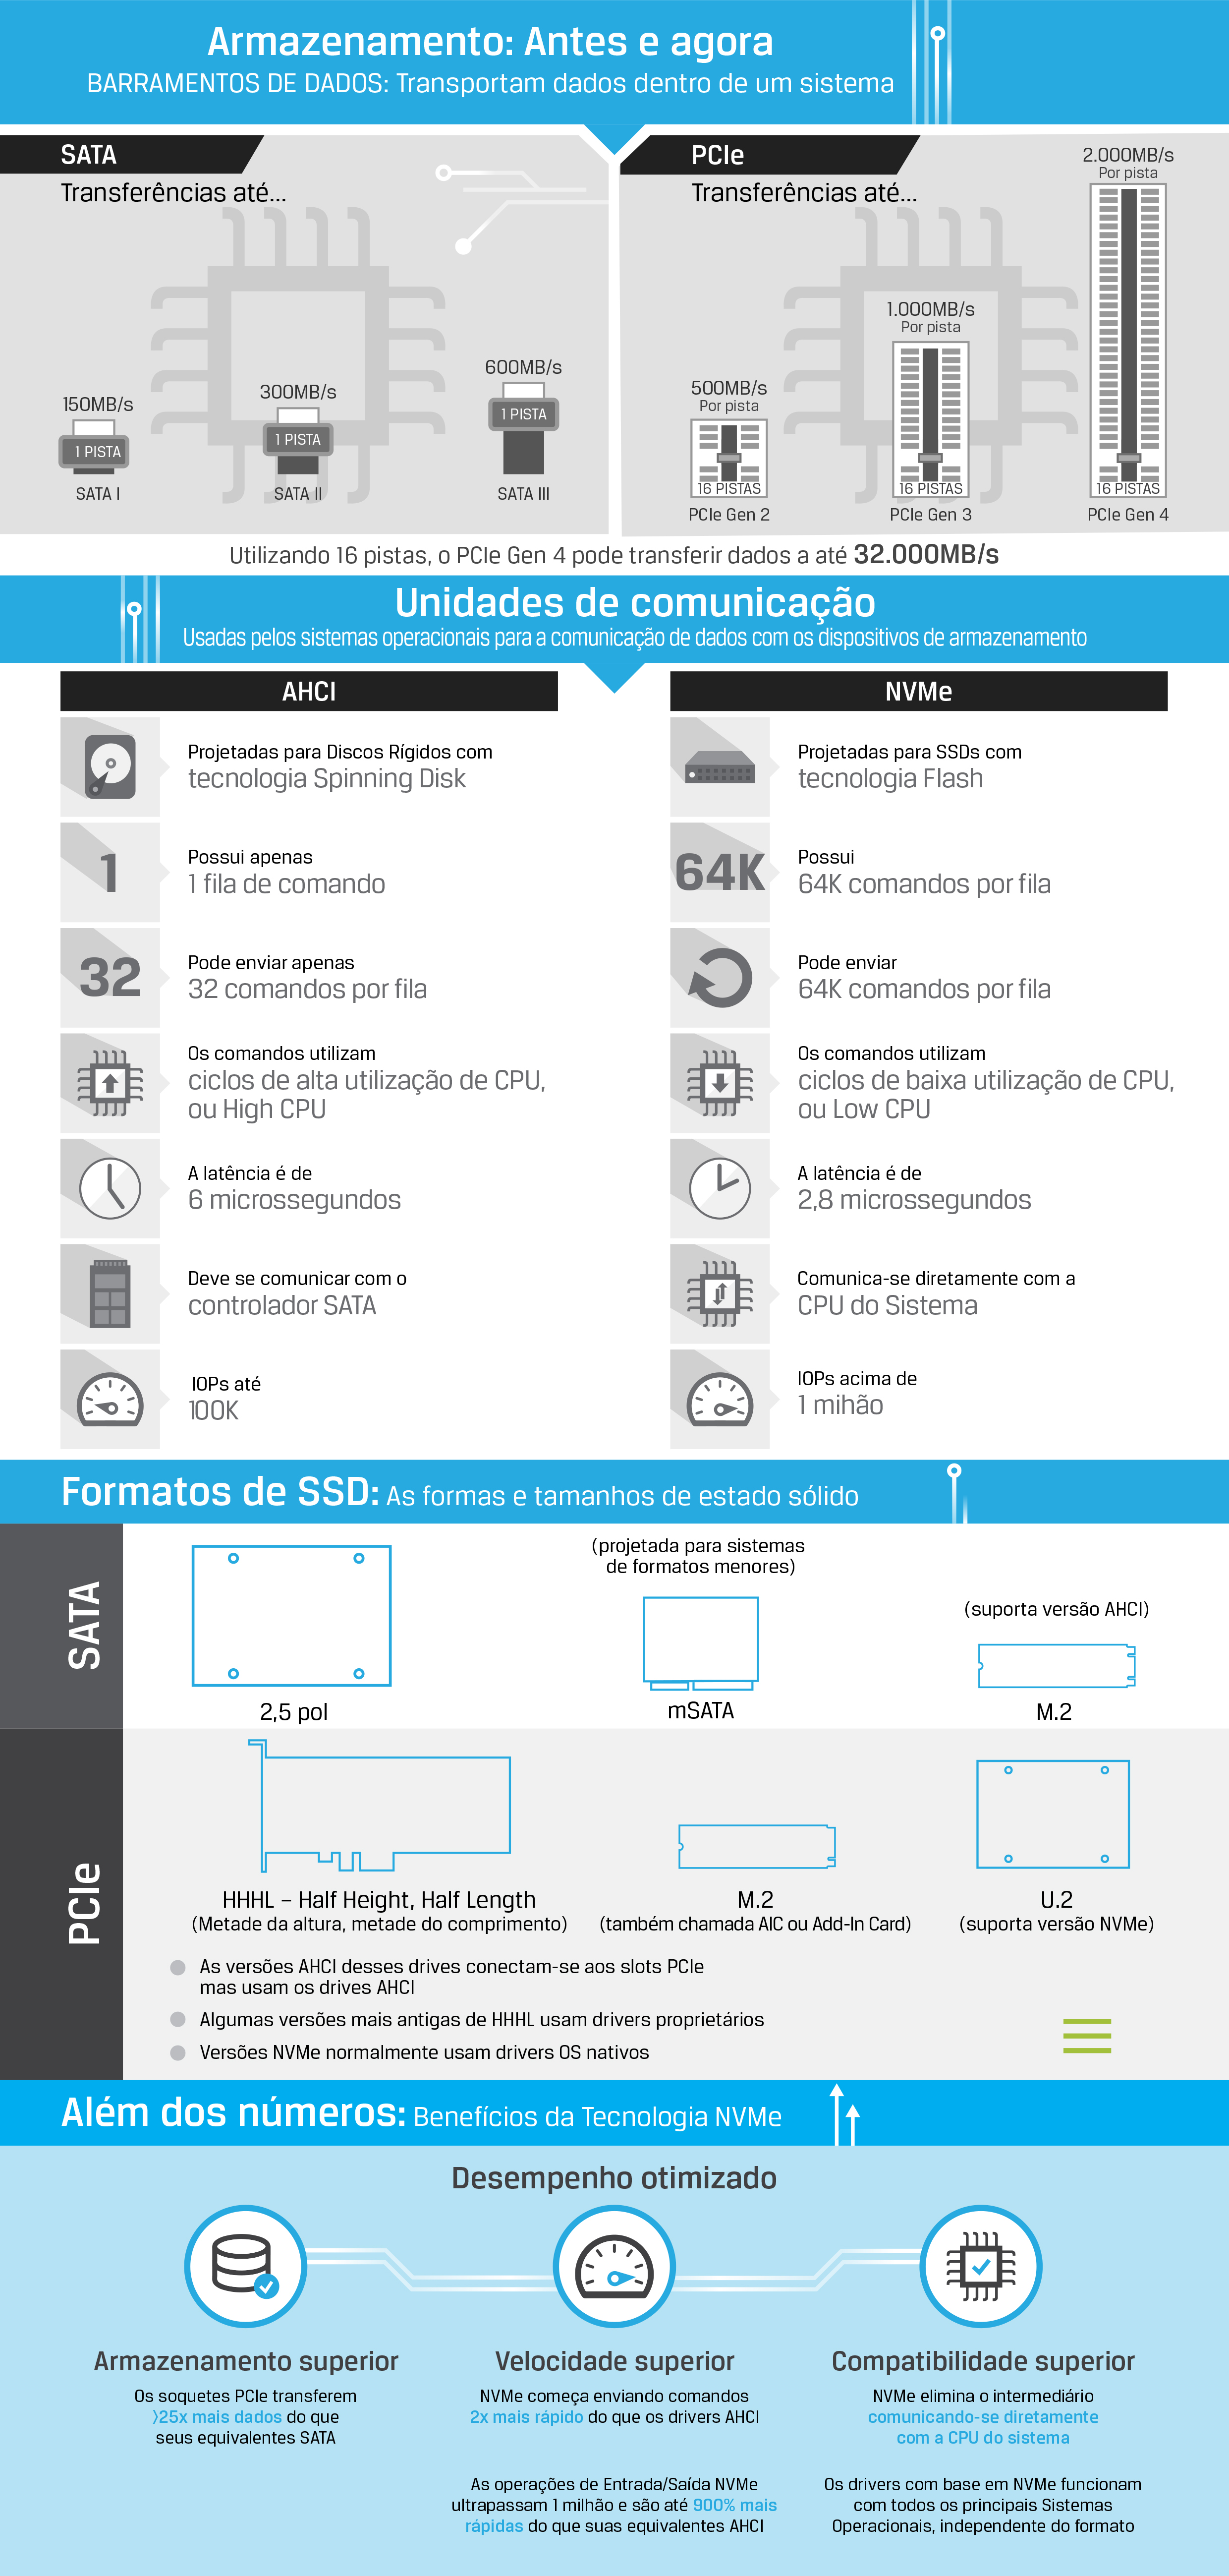 Infographic describing SSD Technology such as NVMe, SATA, PCIe, AHCI, M.2 and U.2